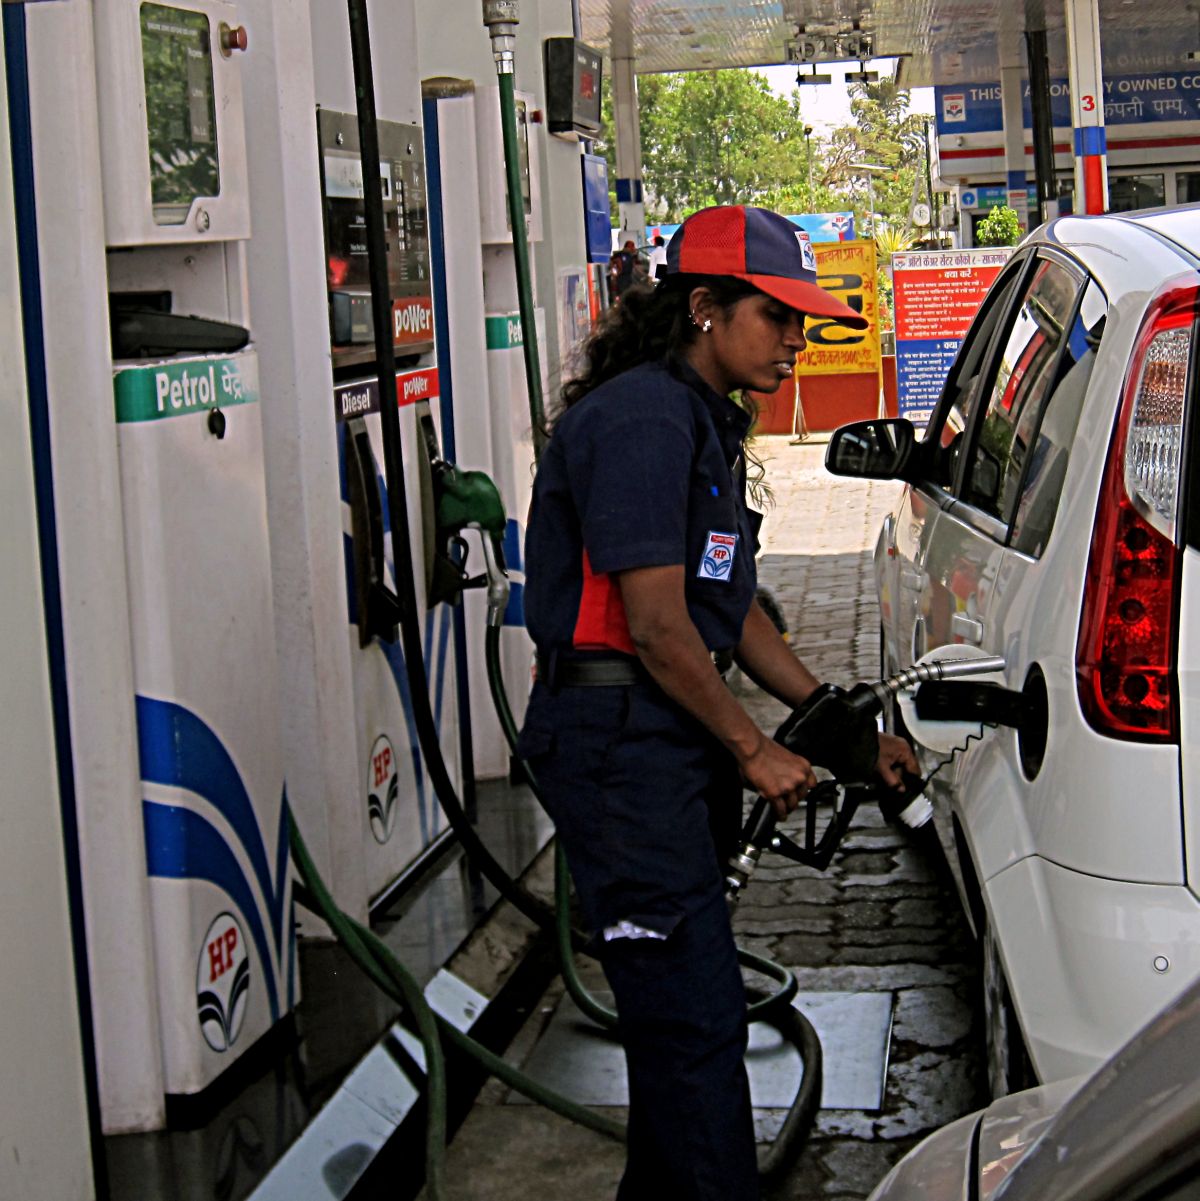 FG may raise pump price of petrol soon: Marketers